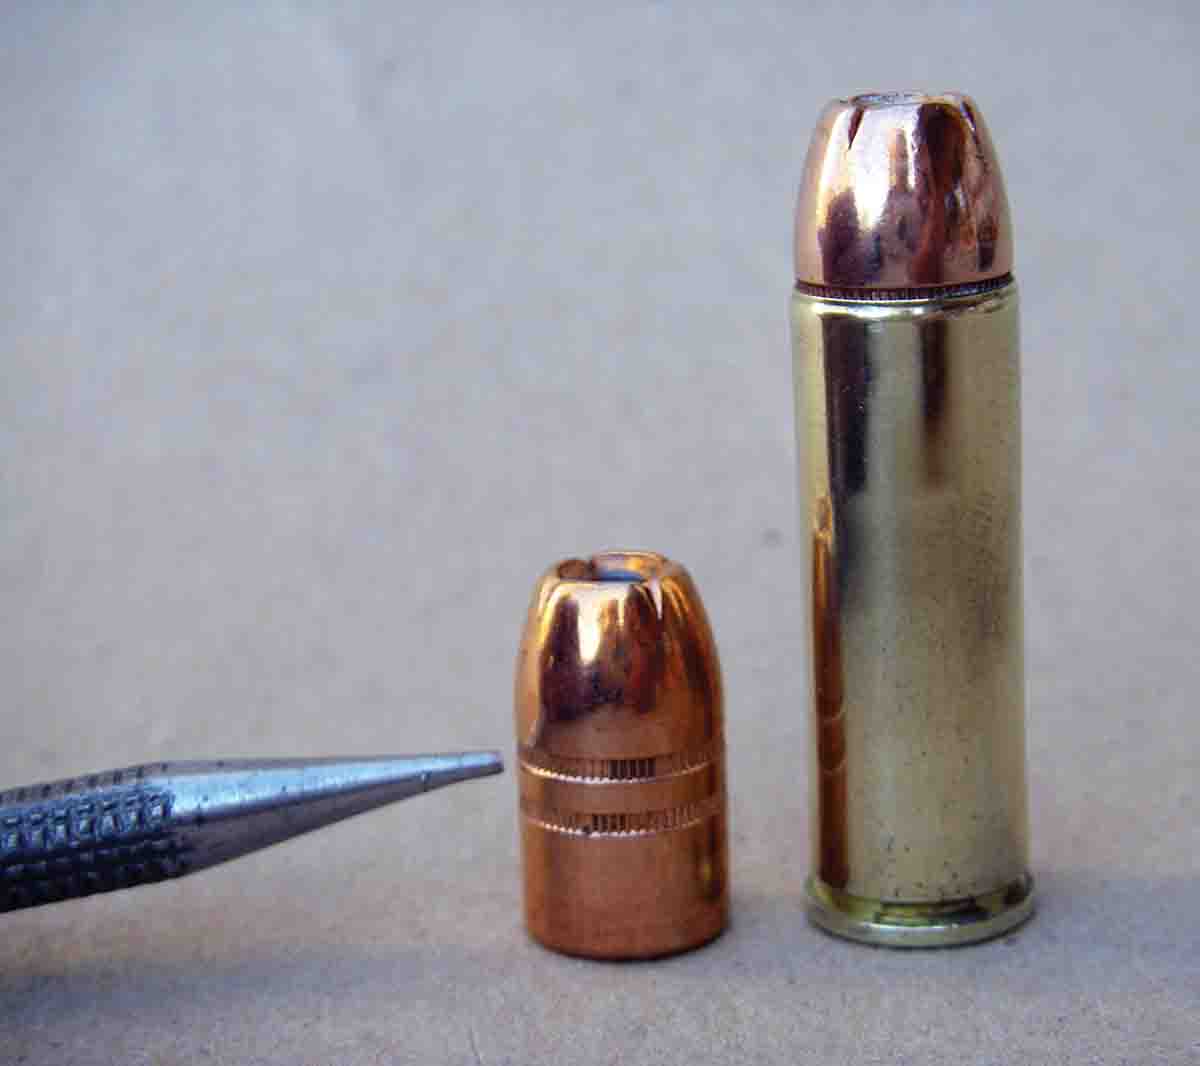 The popular Hornady 300-grain XTP-MAG should be crimped on the upper crimp groove to achieve the proper overall cartridge length.